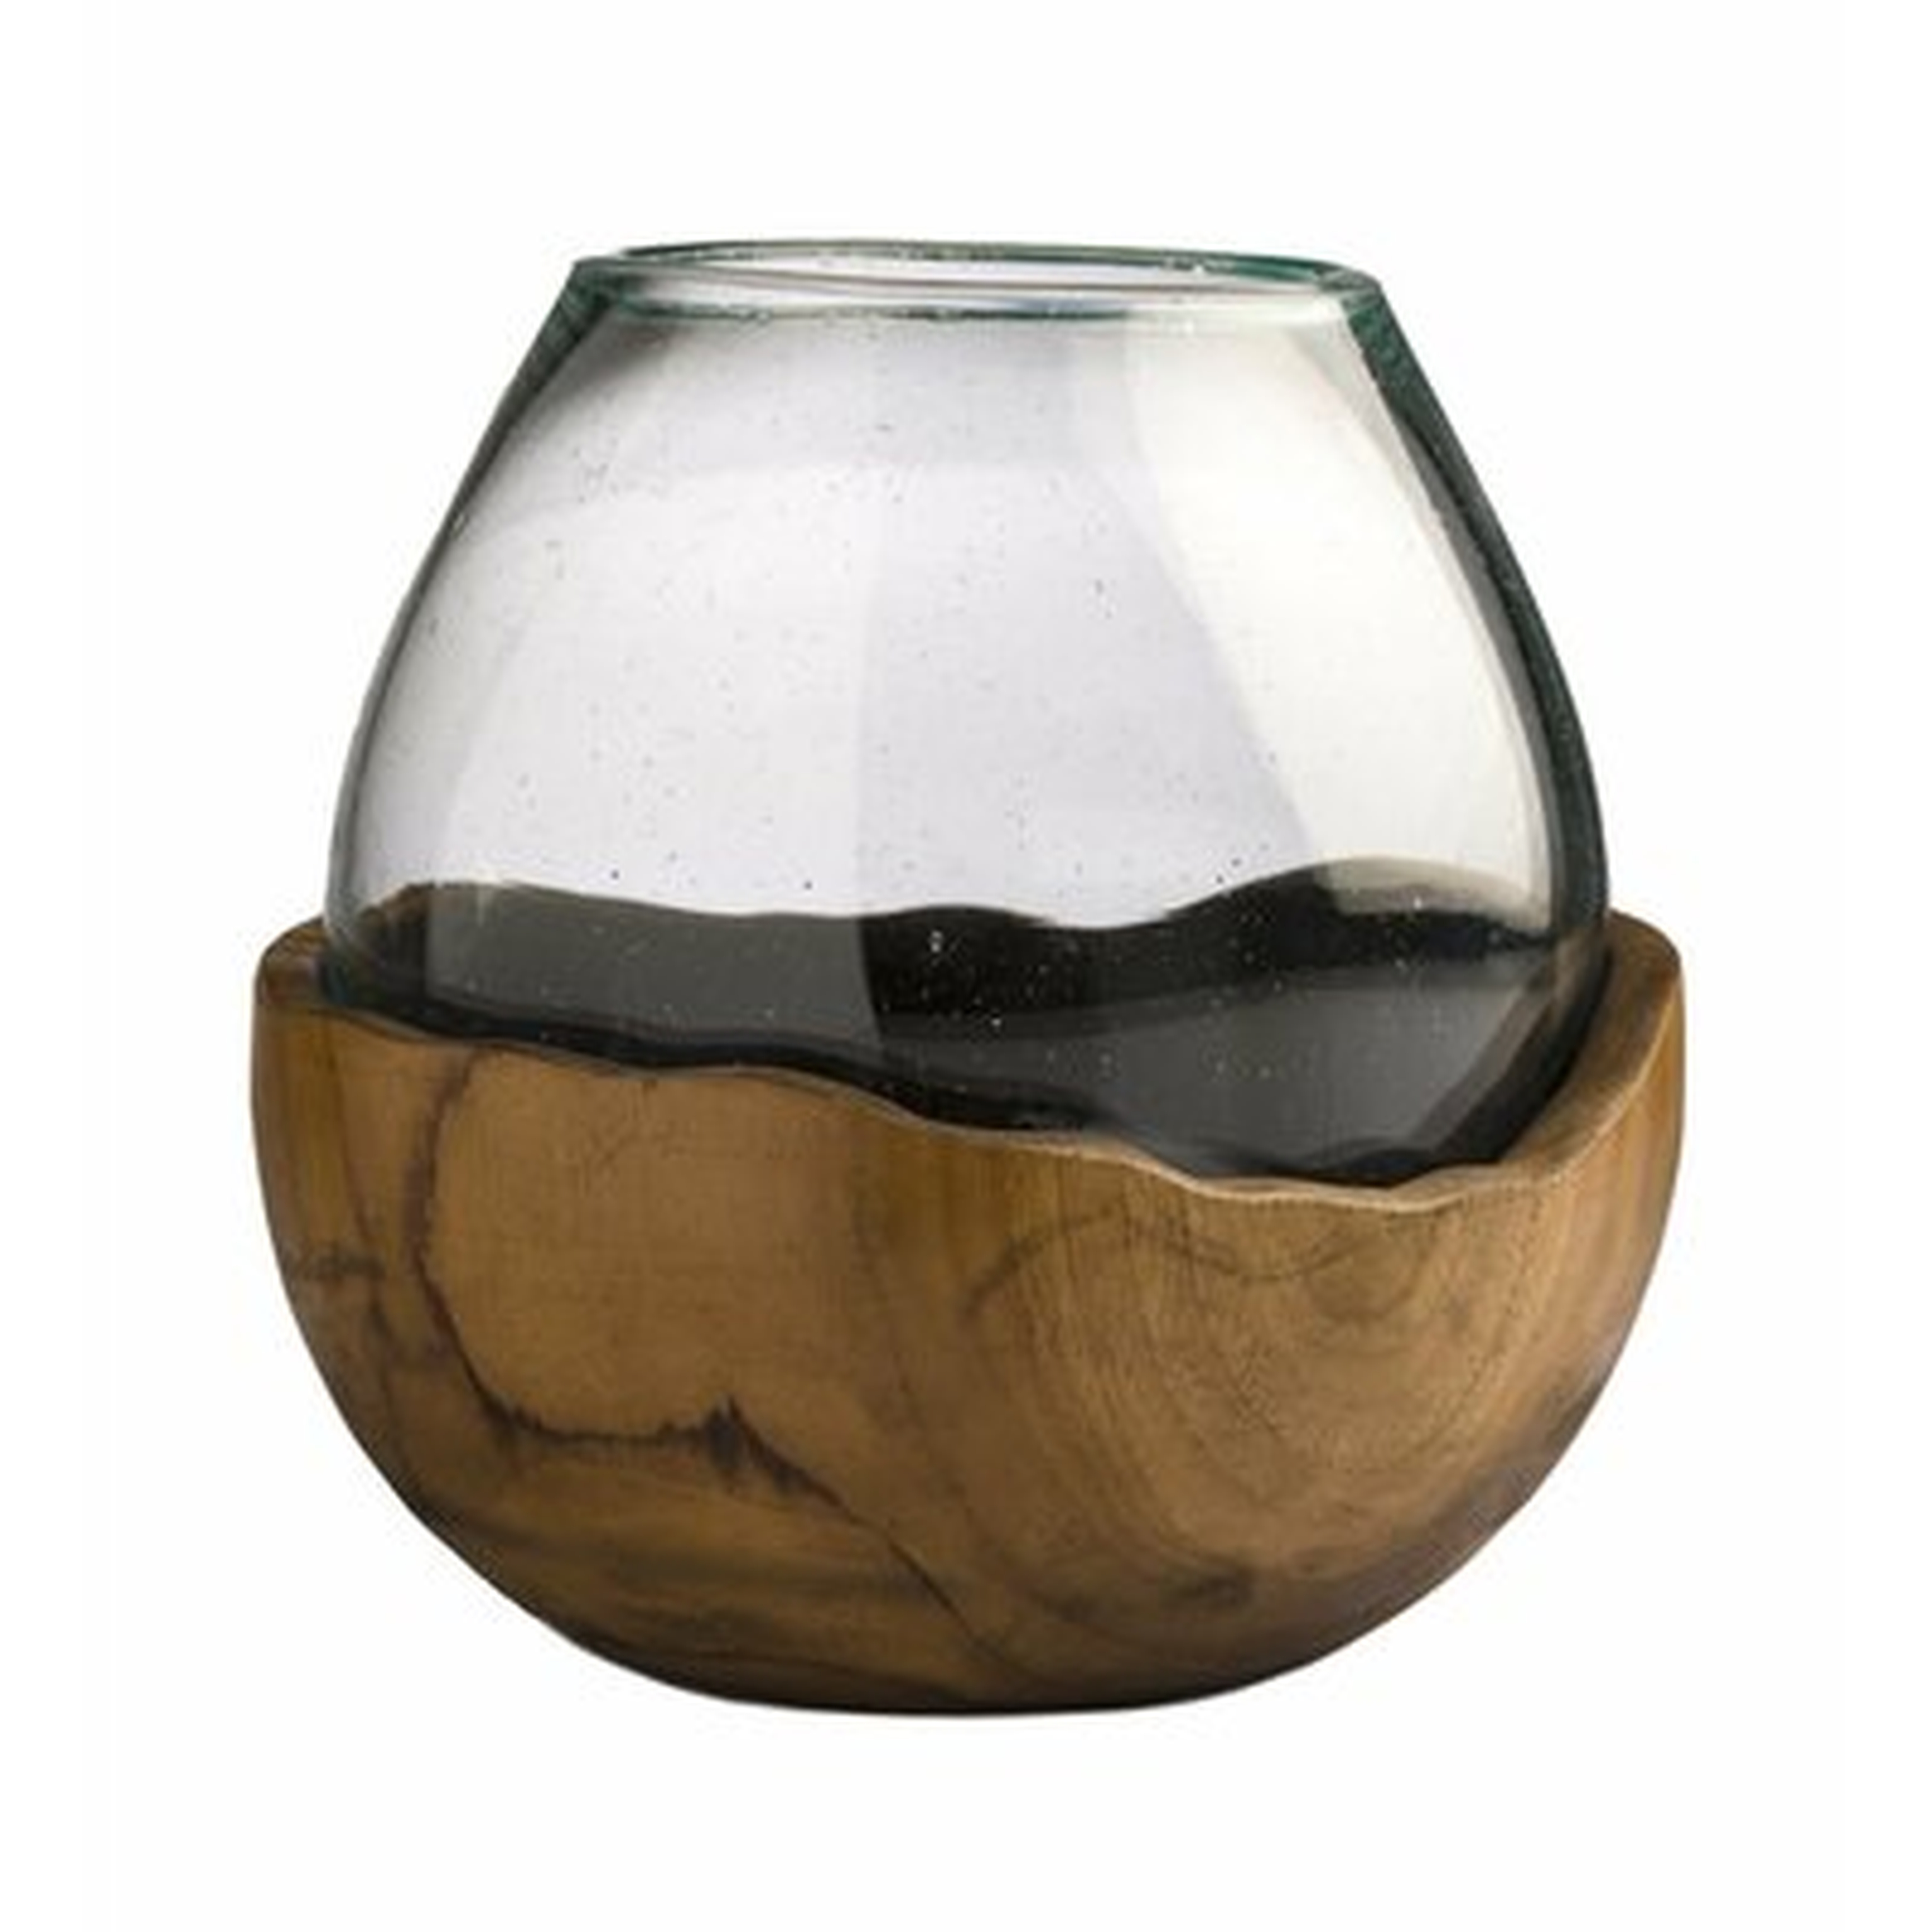 Blown Glass Vase With Teak Base- Small, Back in Stock Sep 16, 2021. - Wayfair